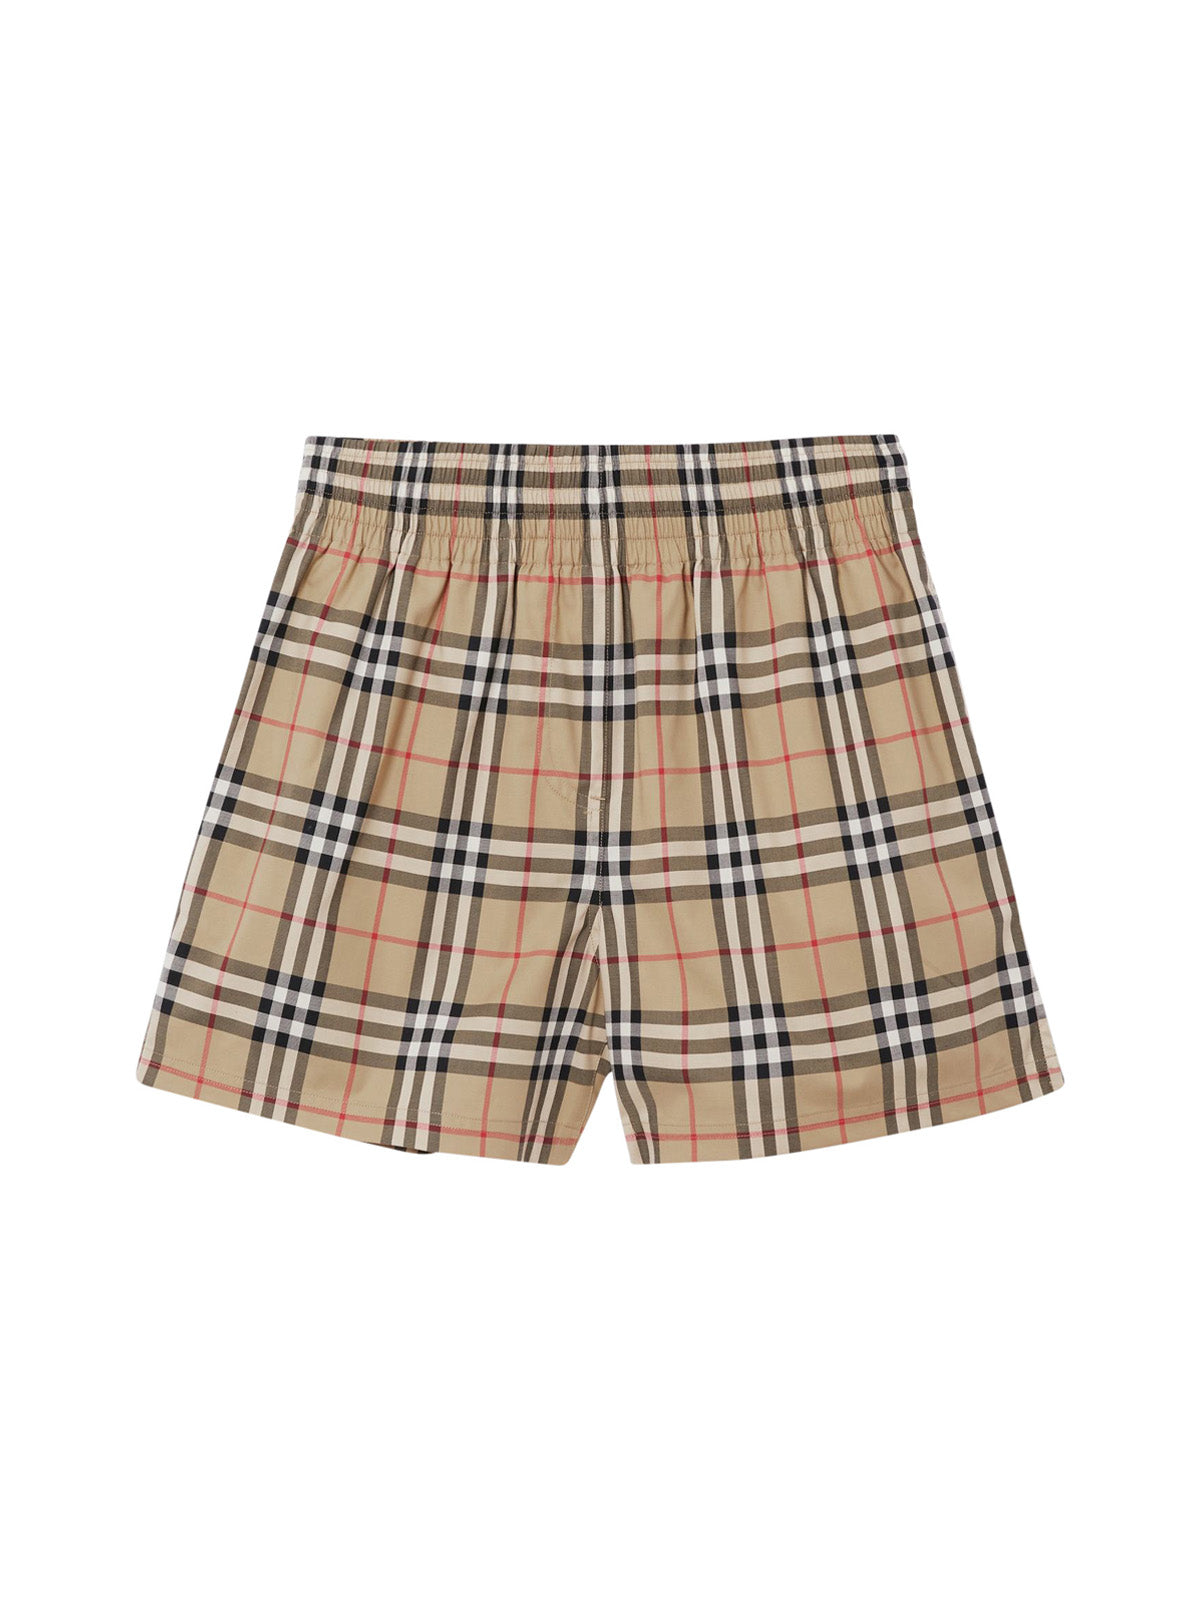 Stretch cotton shorts with Vintage check motif and side bands